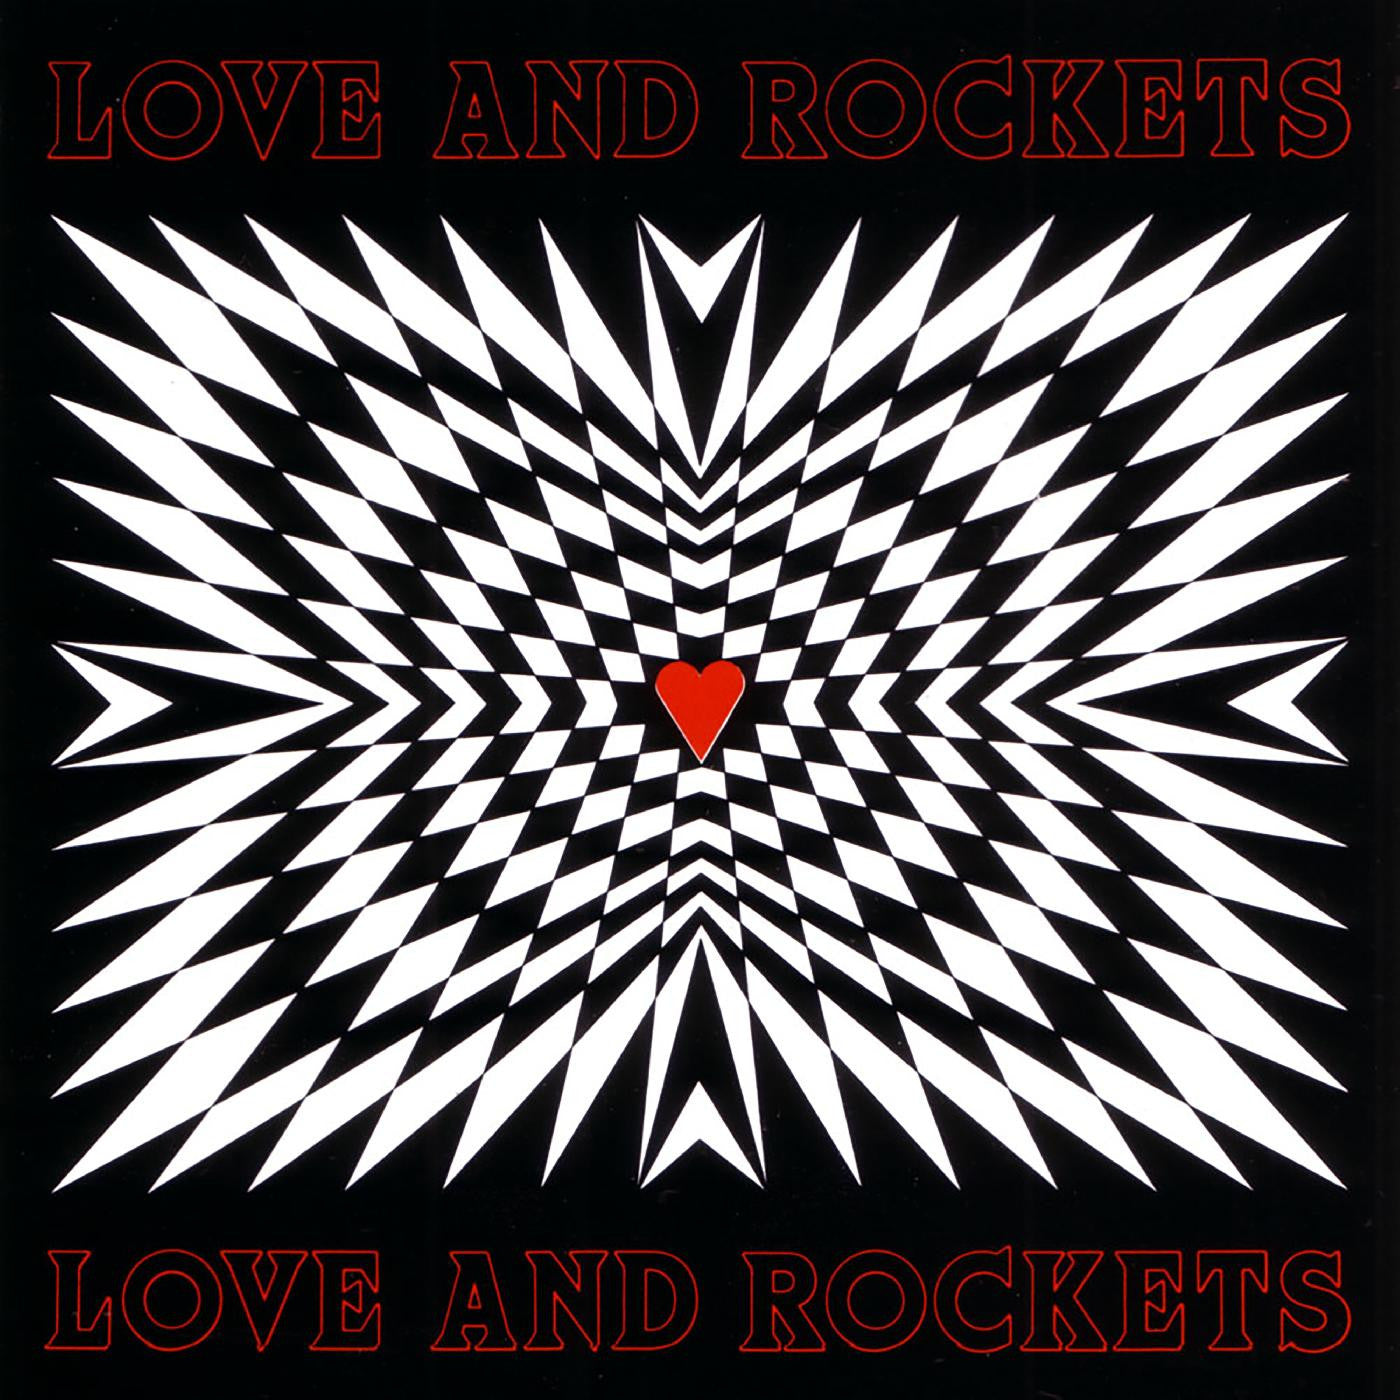 Love and Rockets - Love and Rockets LP